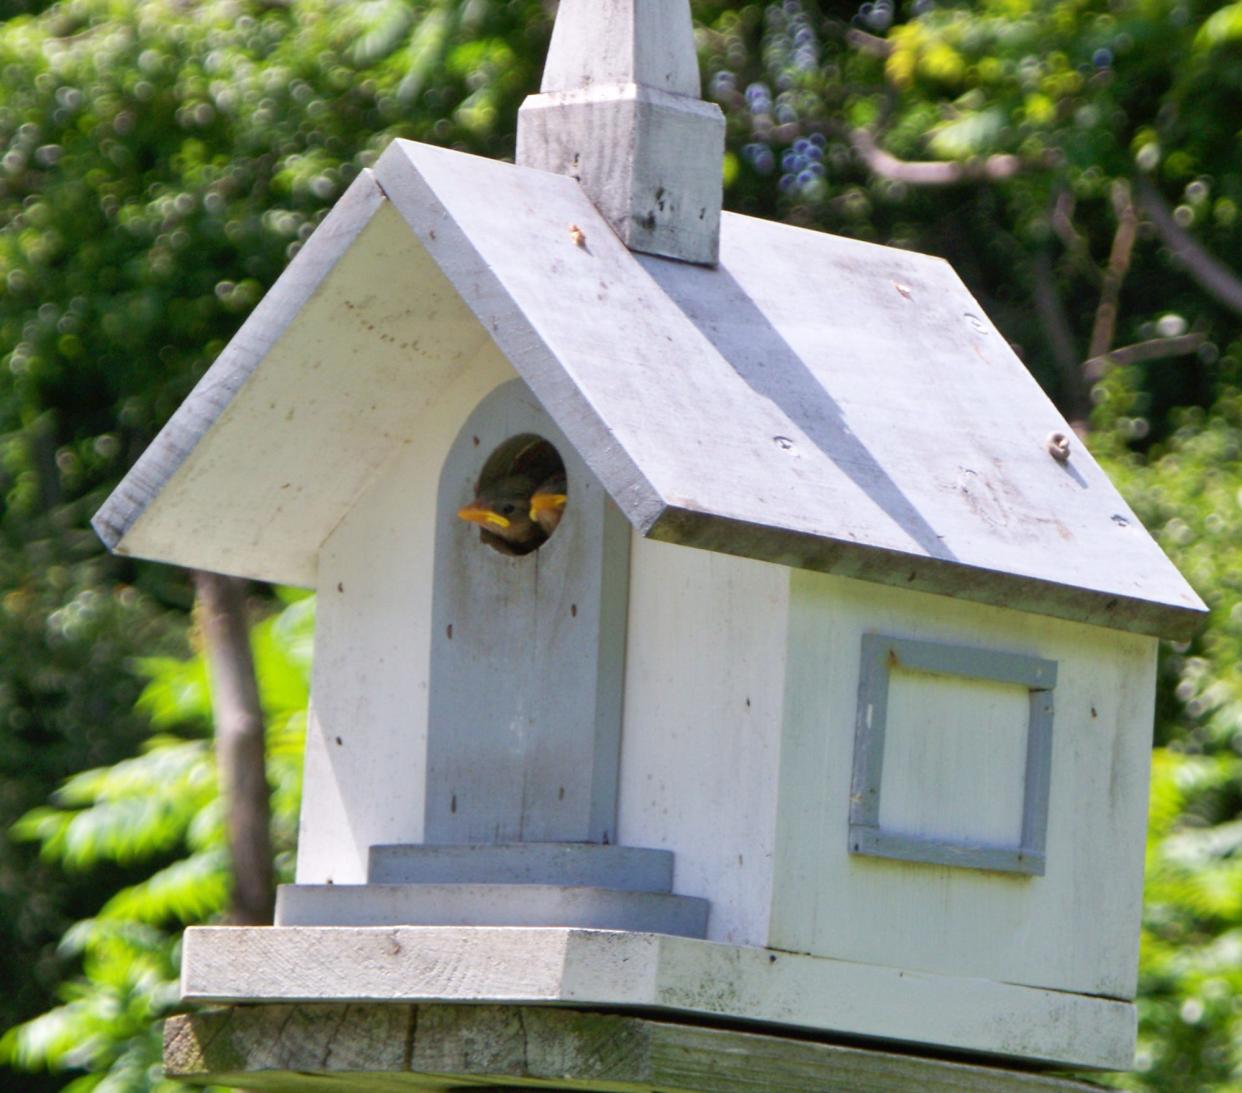 A new study by N.C. State researchers found house wrens, like these two seen peeking out of a church bird house, could be negatively impacted by artificial light at night.